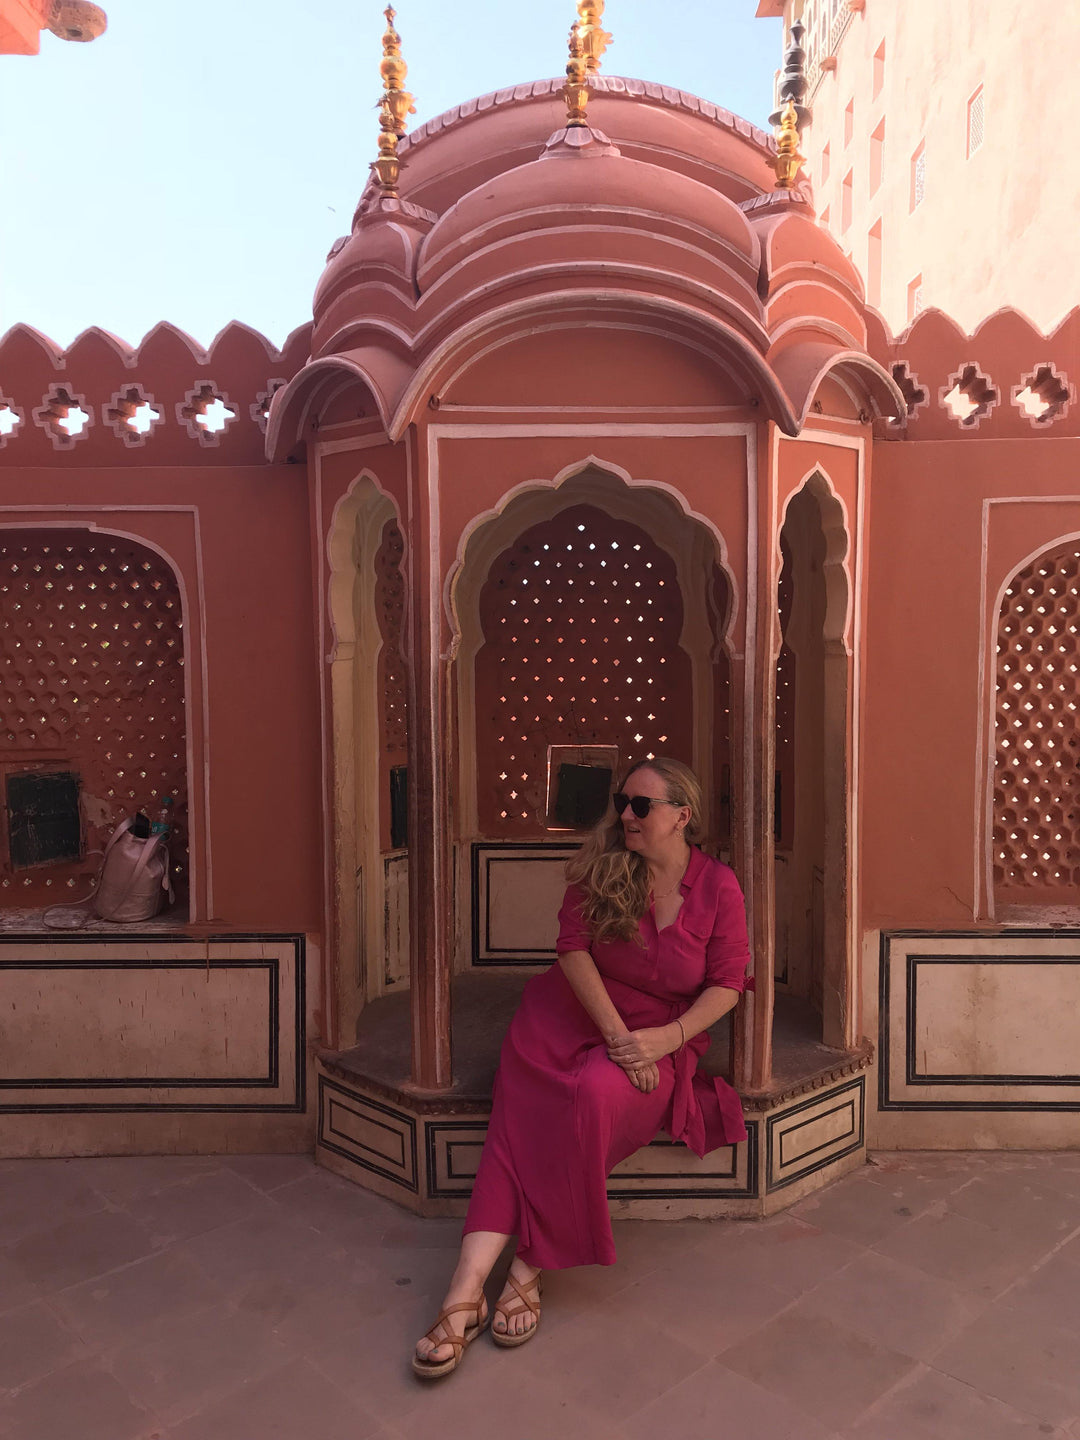 48 hours in Jaipur - Dilli Grey